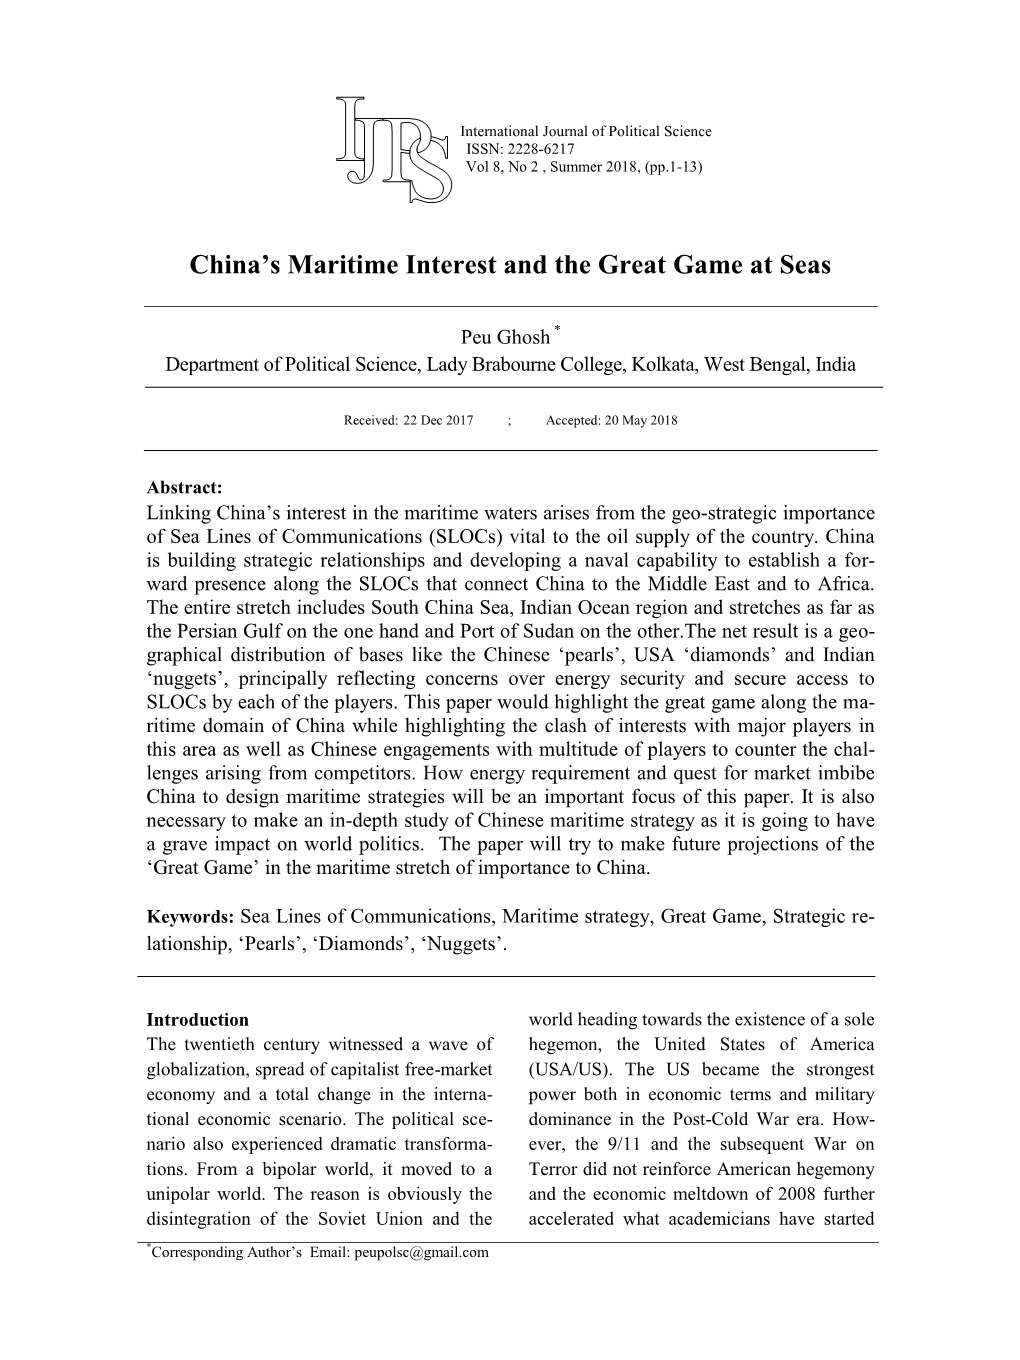 China's Maritime Interest and the Great Game at Seas